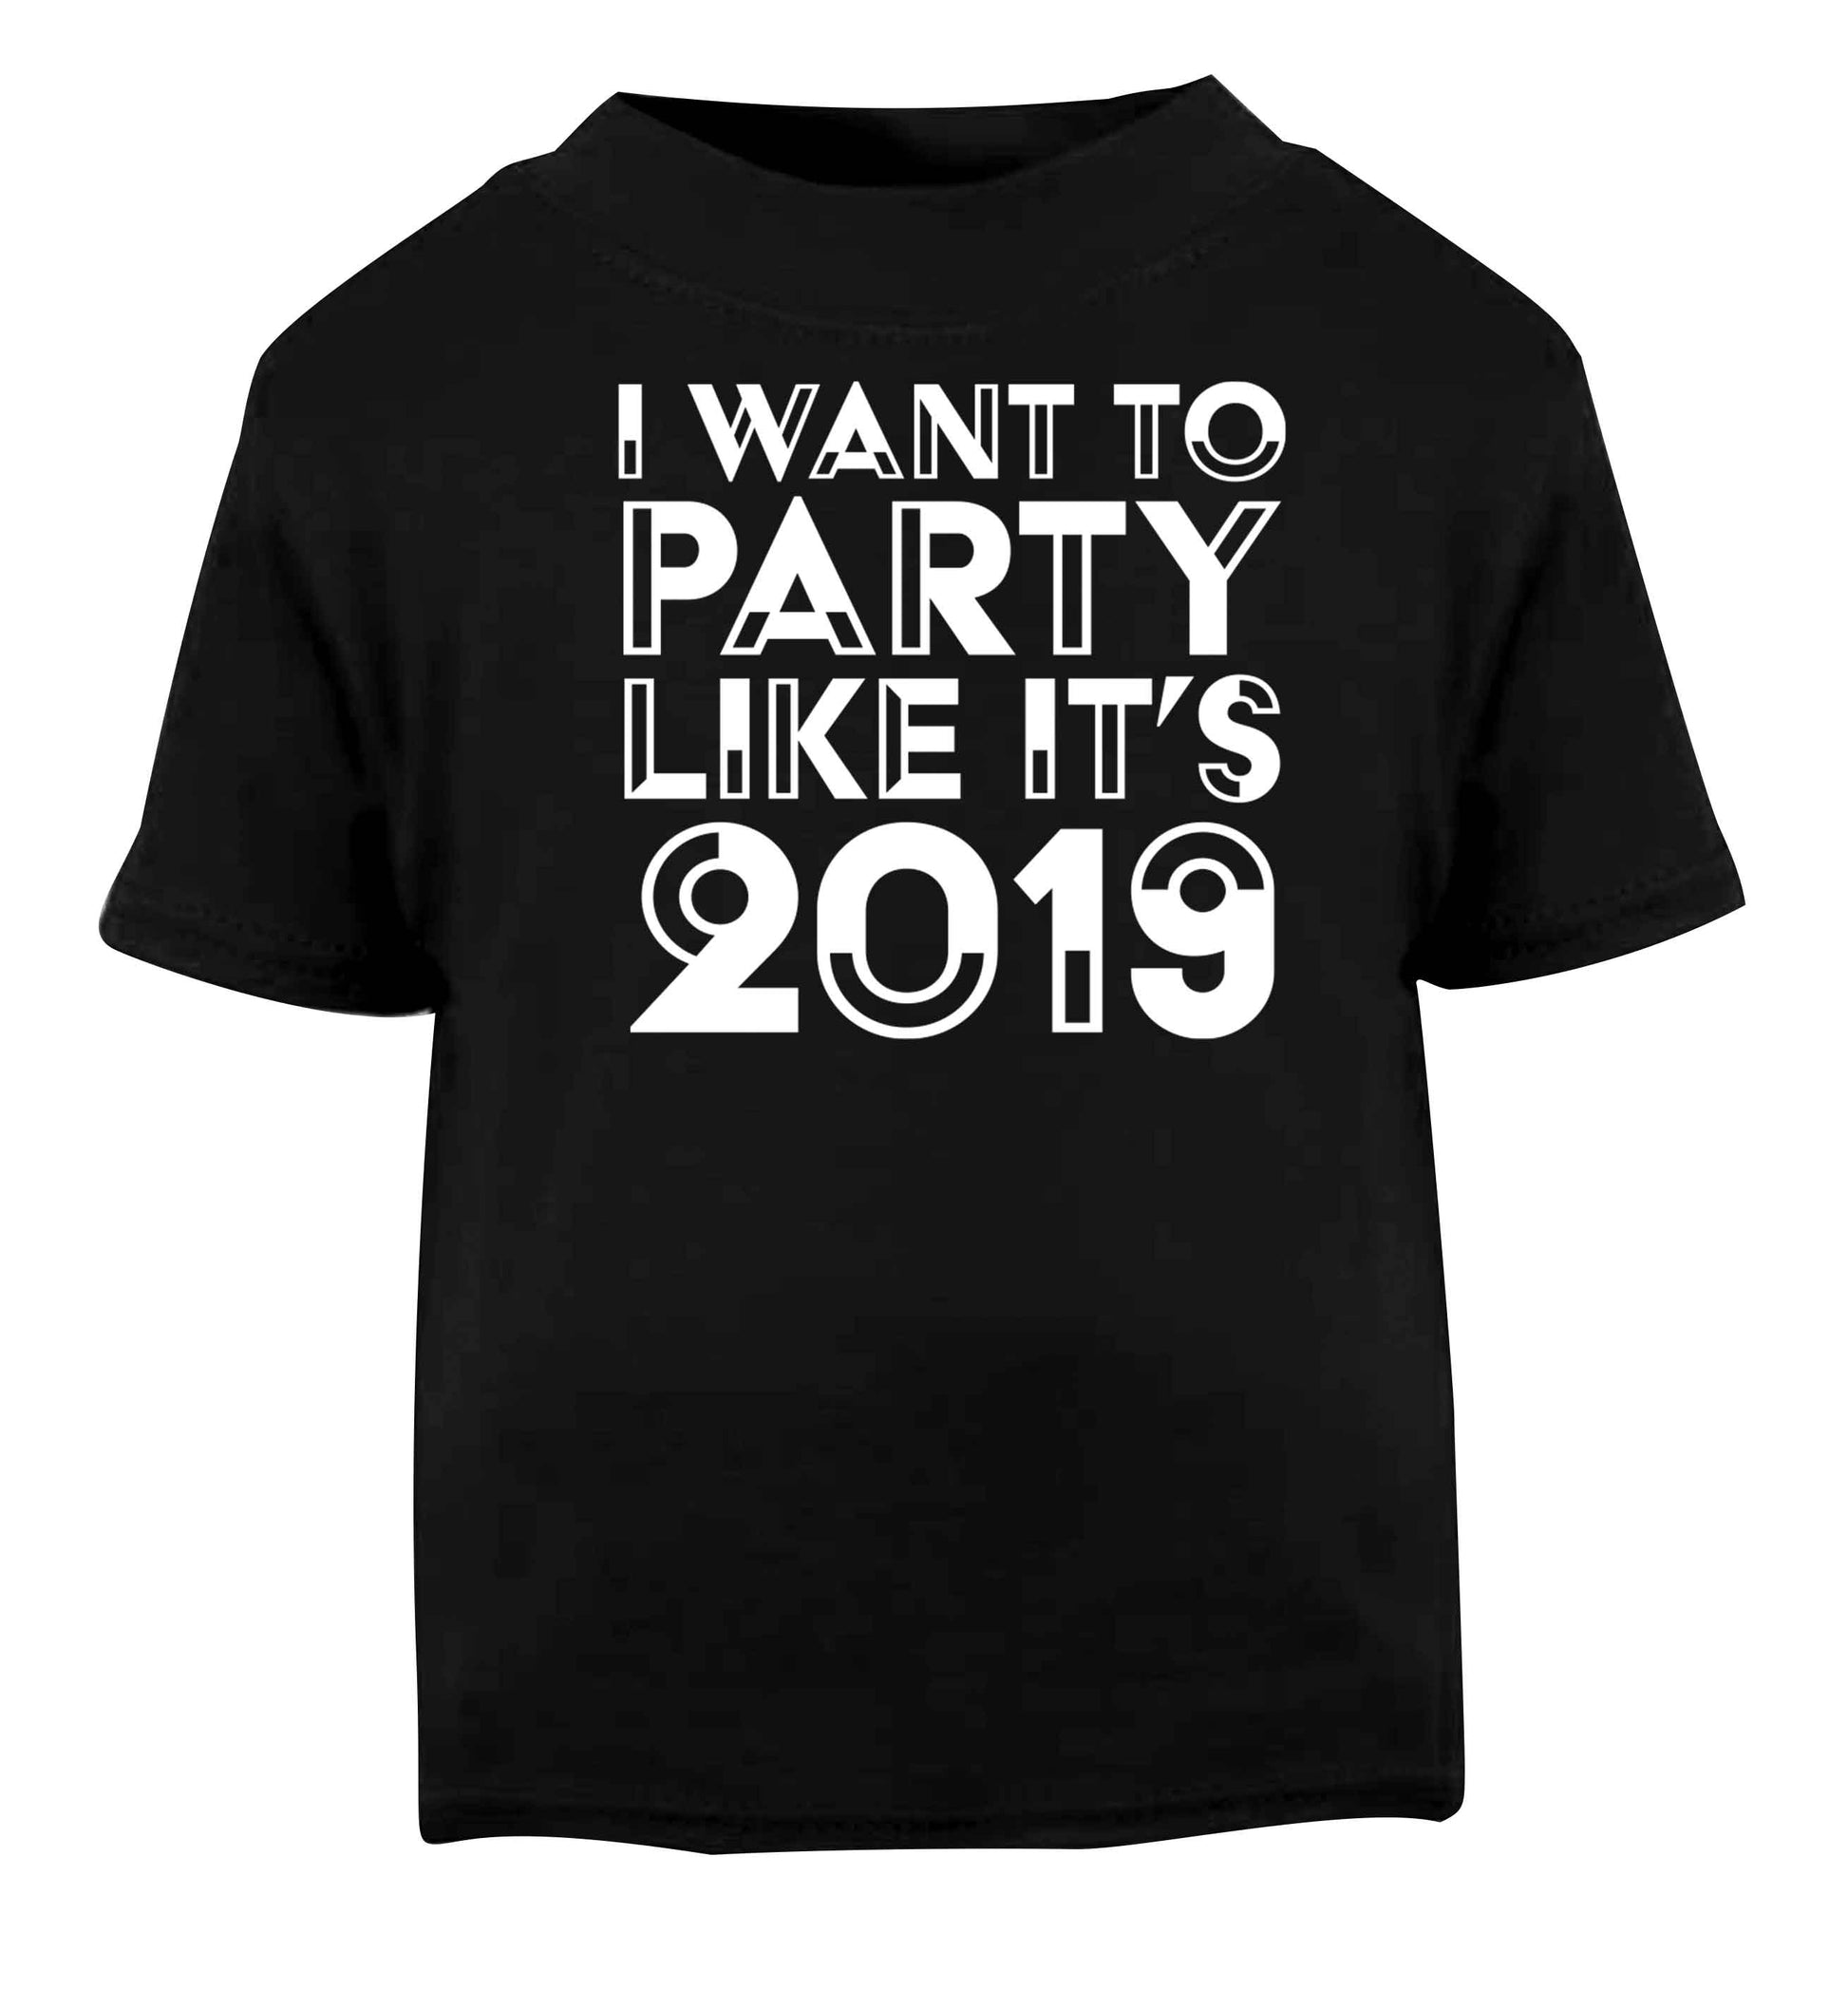 I want to party like it's 2019 Black baby toddler Tshirt 2 years